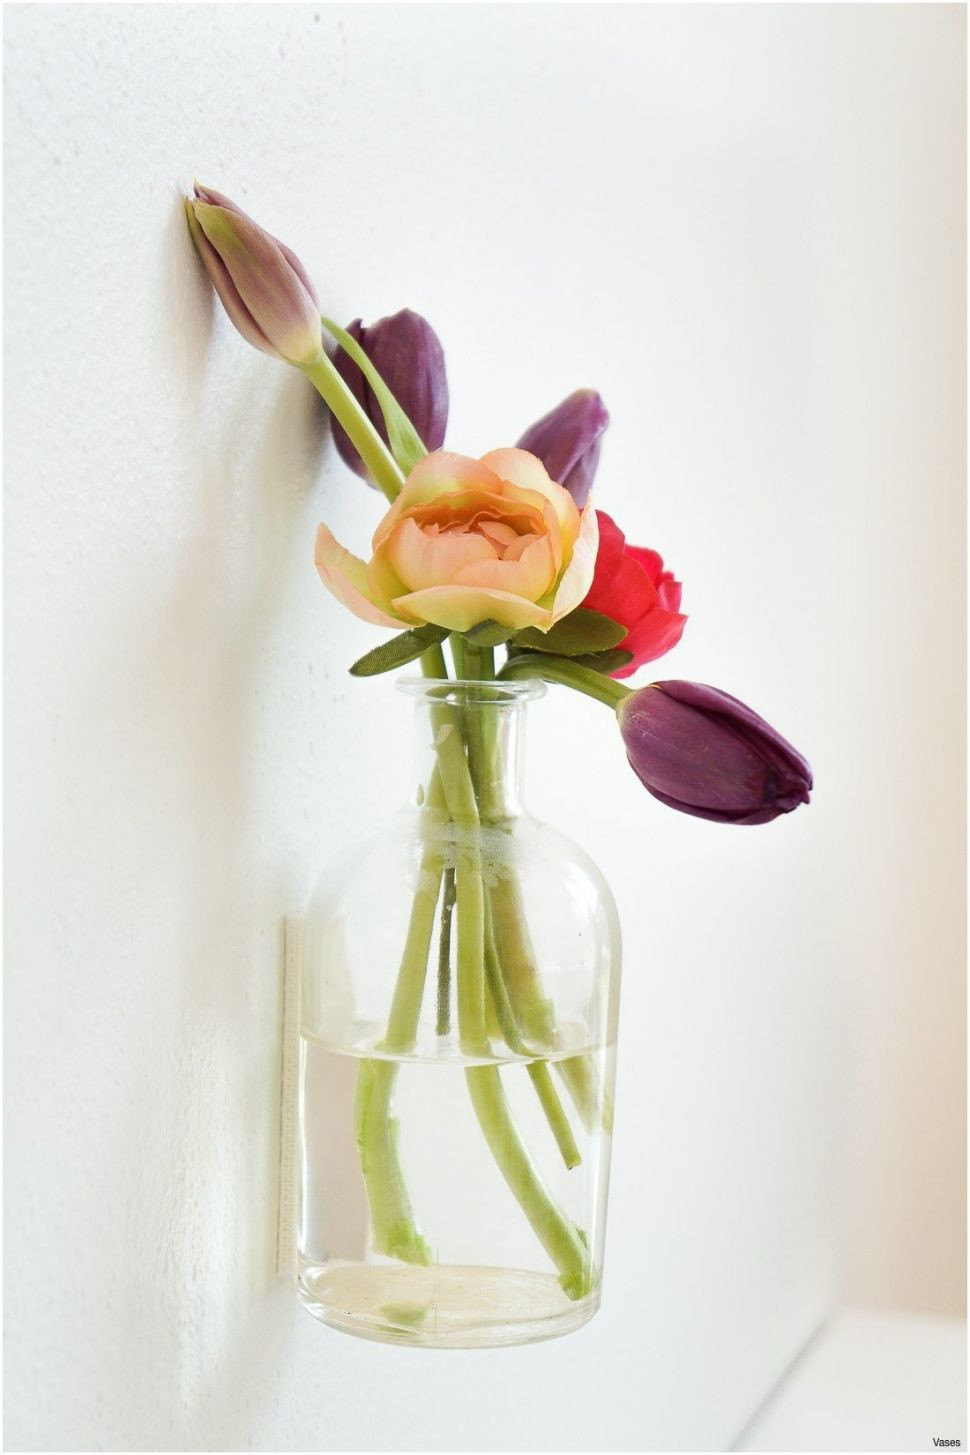 vase with suction cup of wall bud vase photos pink silk flowers sensational il fullxfull with regard to pink silk flowers sensational il fullxfull l7e9h vases wall flower